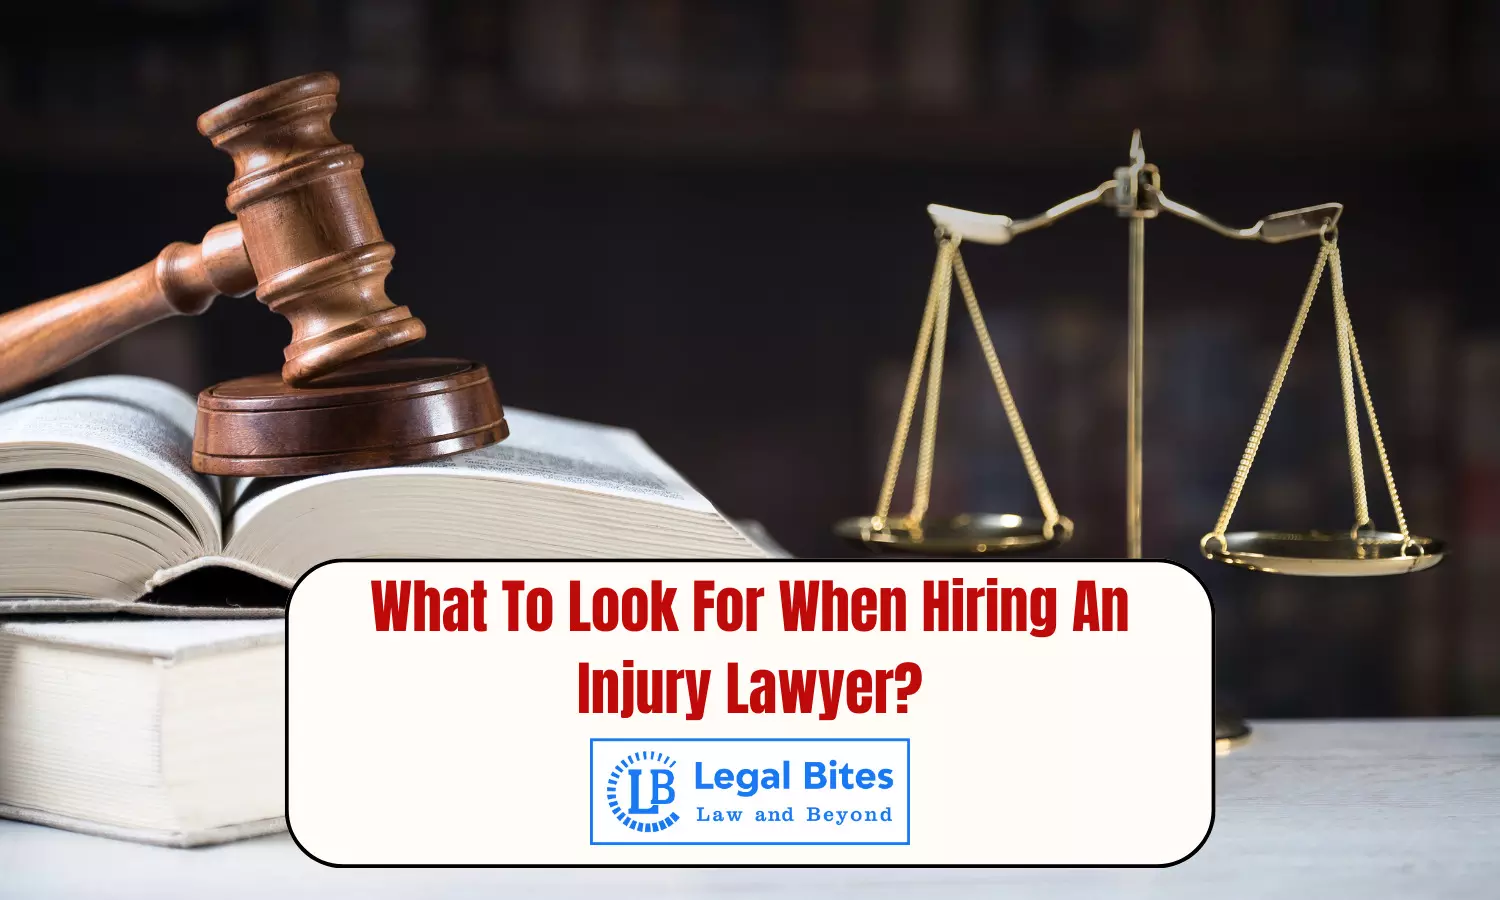 What To Look For When Hiring An Injury Lawyer?